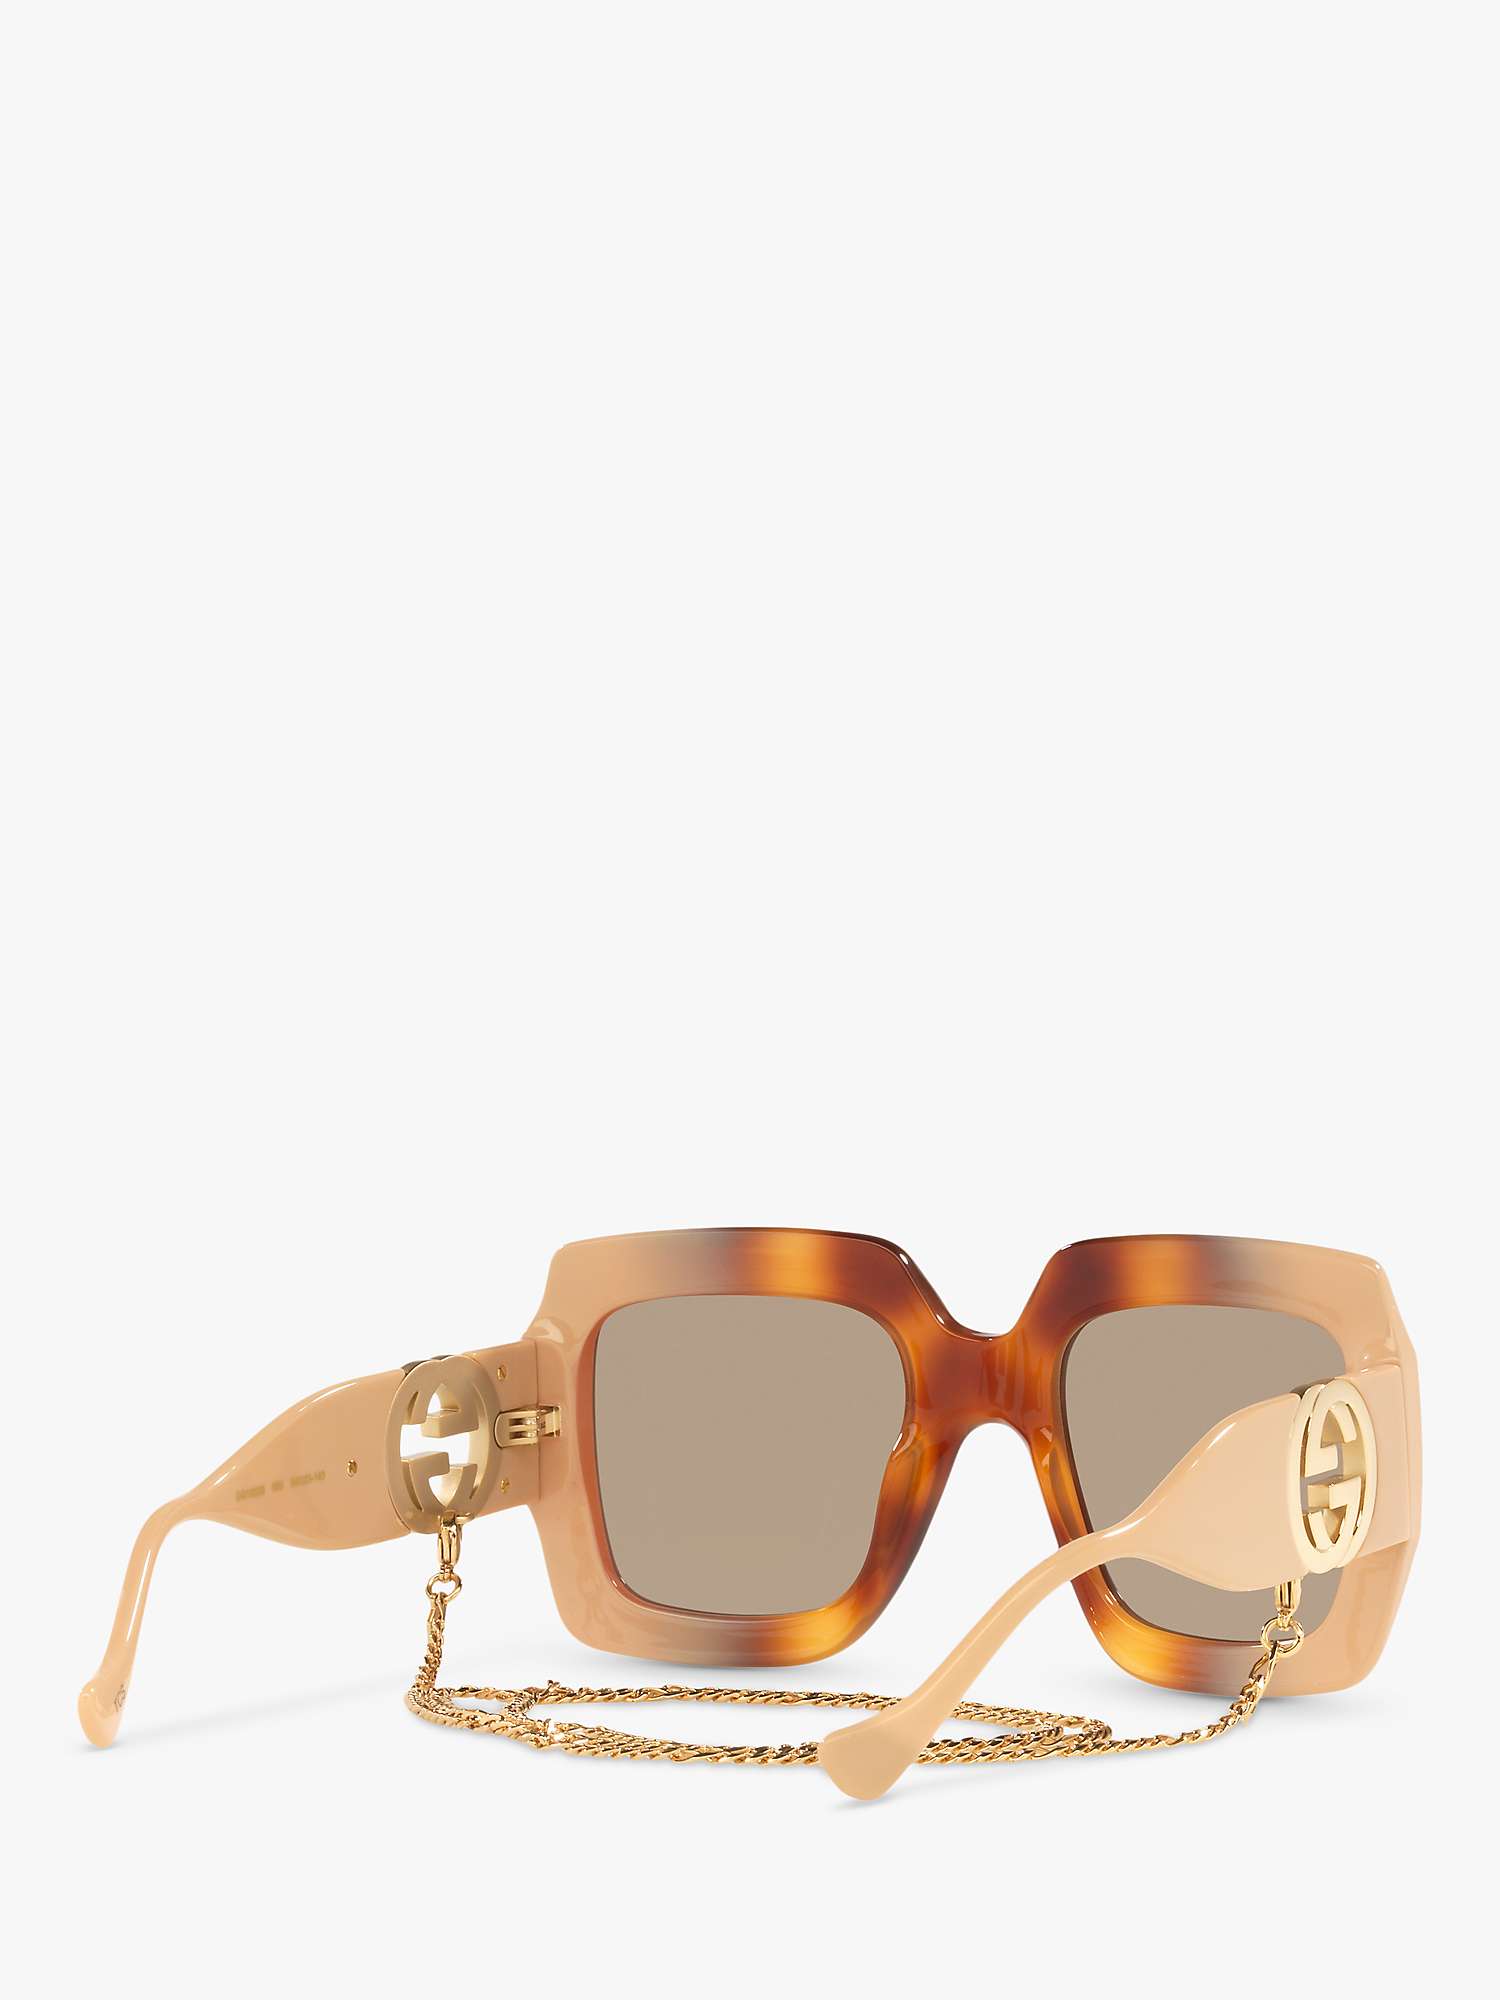 Buy Gucci GG1022S Women's Chunky Square Sunglasses, Beige/Grey Online at johnlewis.com